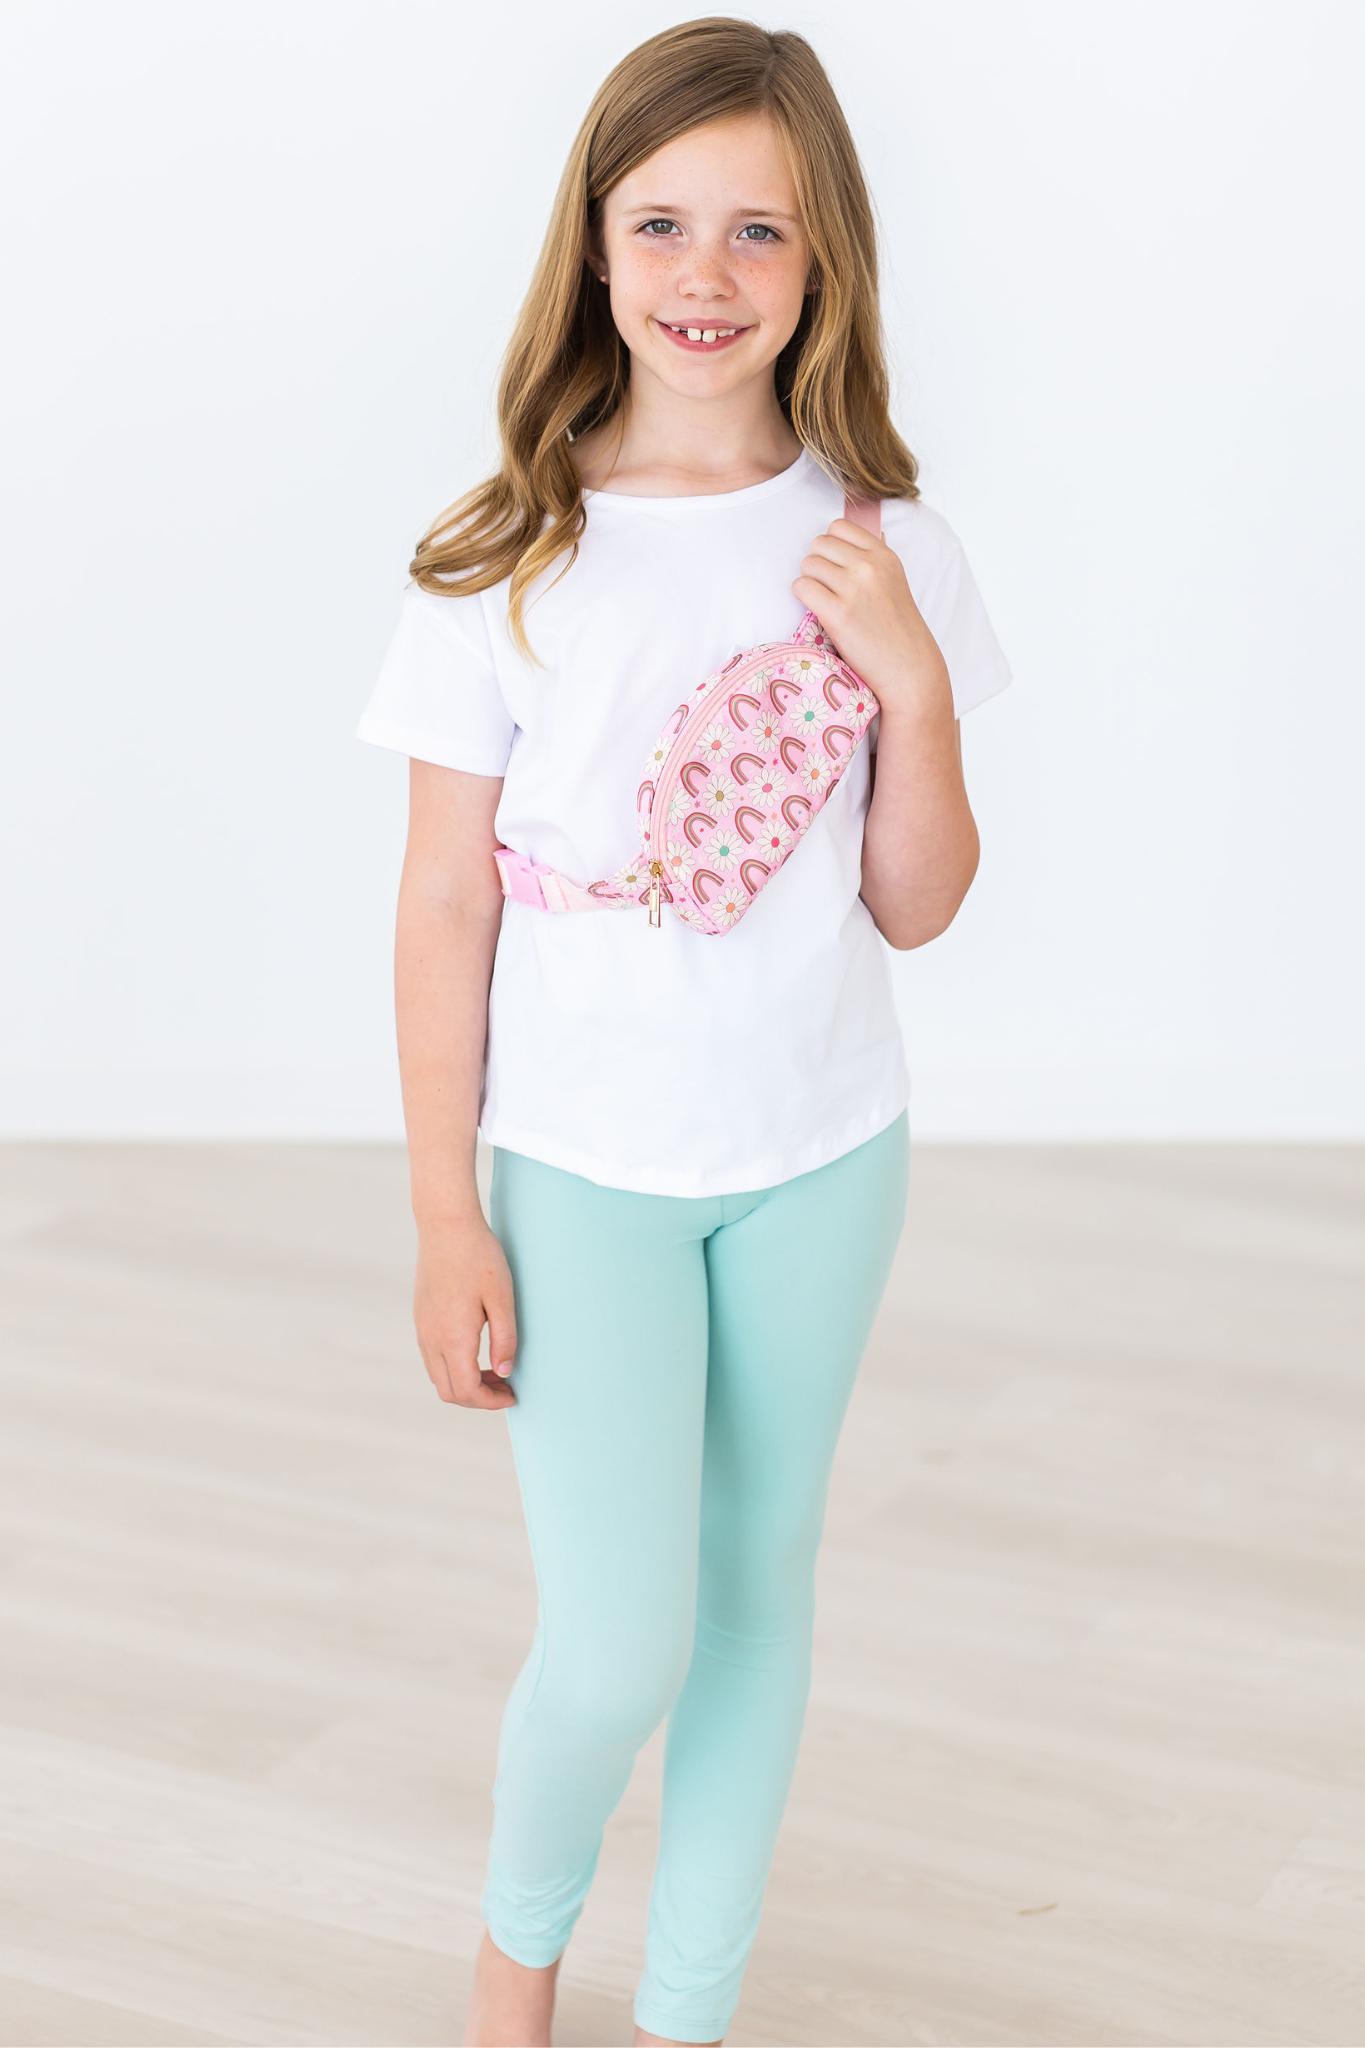 Cute Candy Colored Knee Length Toddler Leggings For Girls Perfect For  Autumn And Summer From Jincaoyu, $11.71